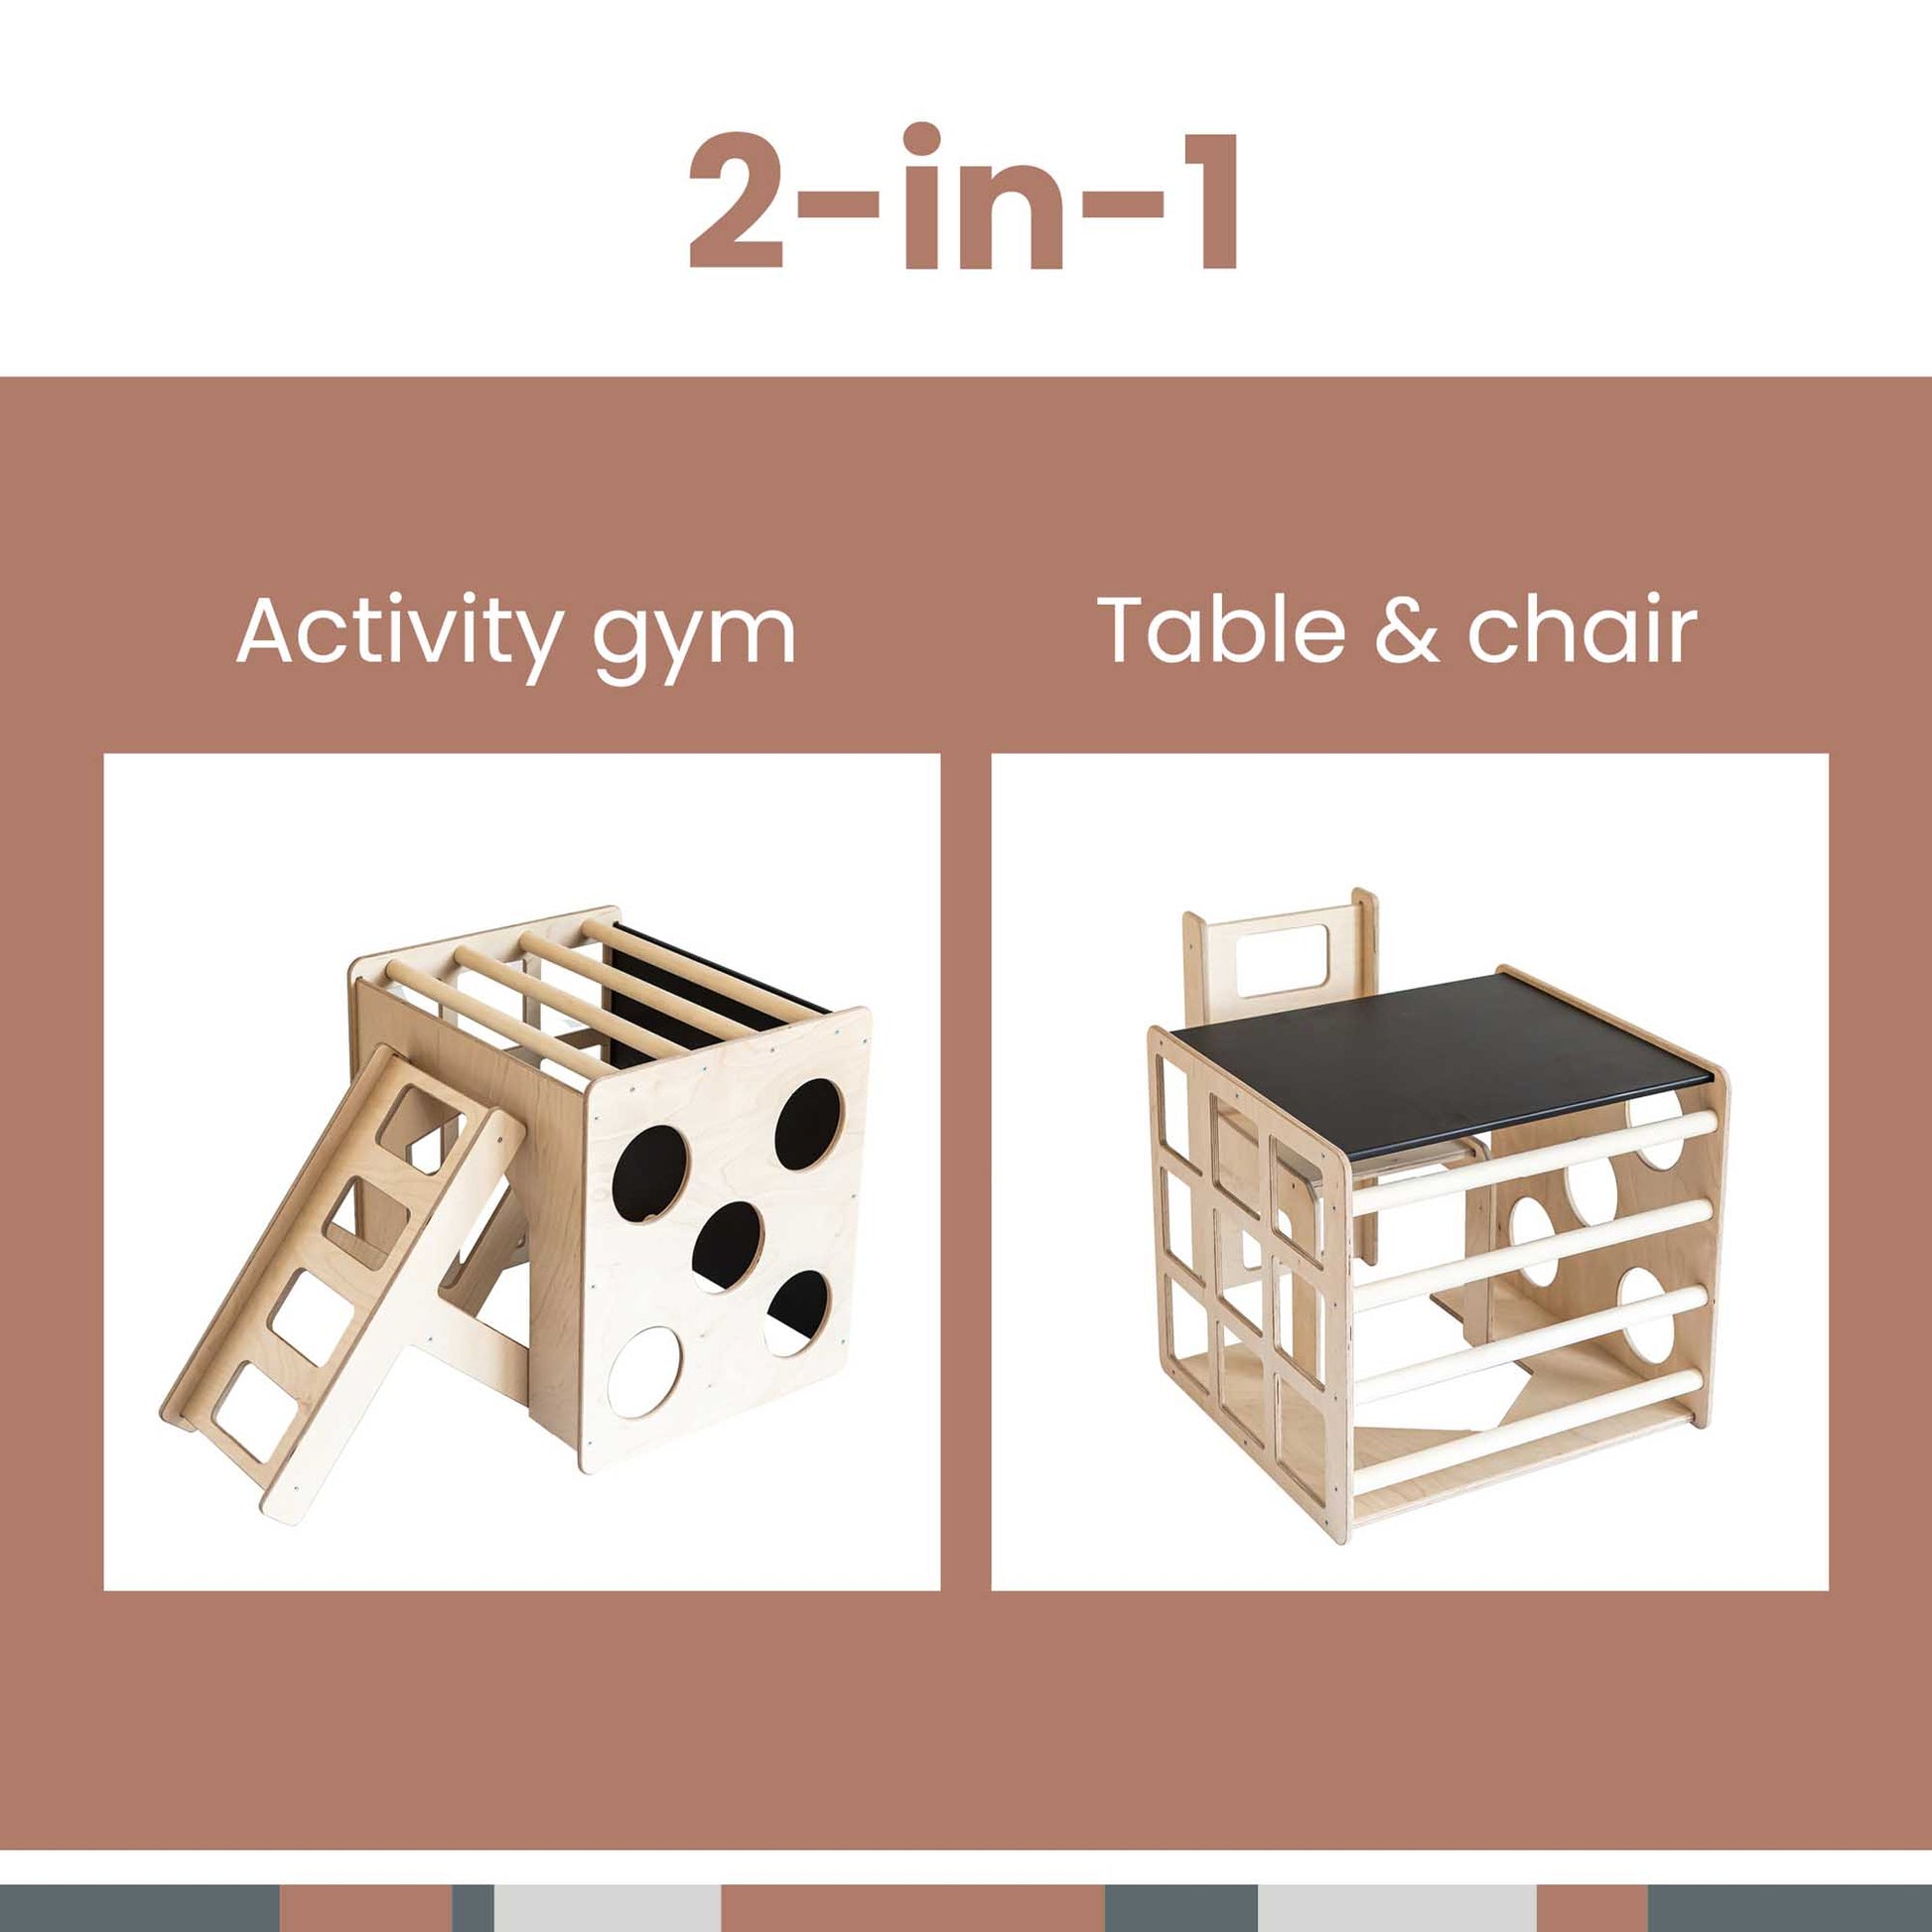 Montessori-inspired 2-in-1 Climbing cube/ table and chair with an activity cube.